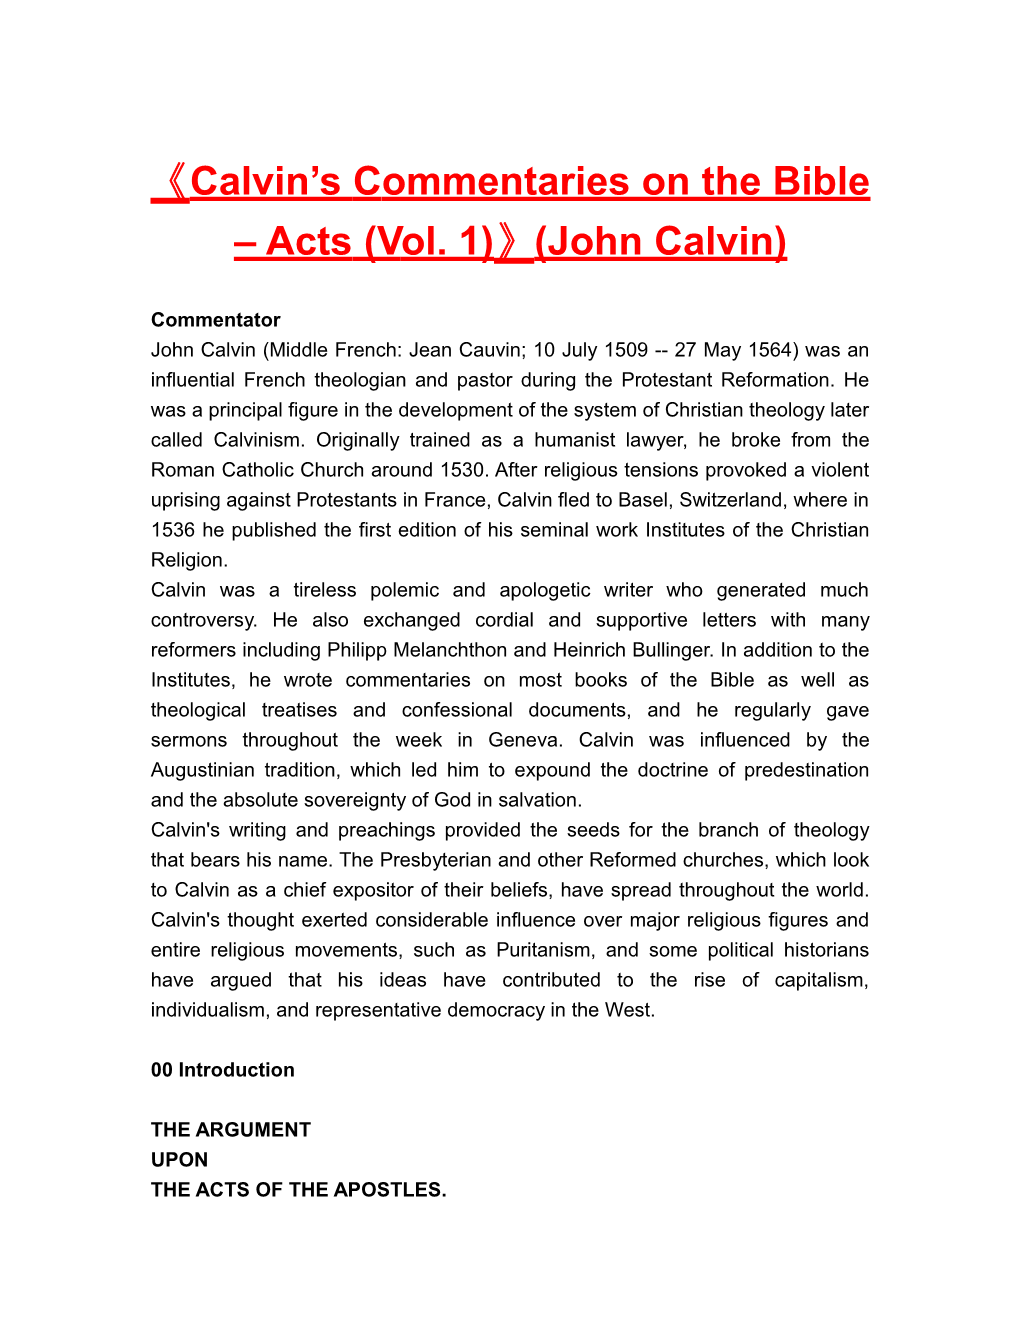 Calvin Scommentaries on the Bible Acts (Vol. 1) (John Calvin)